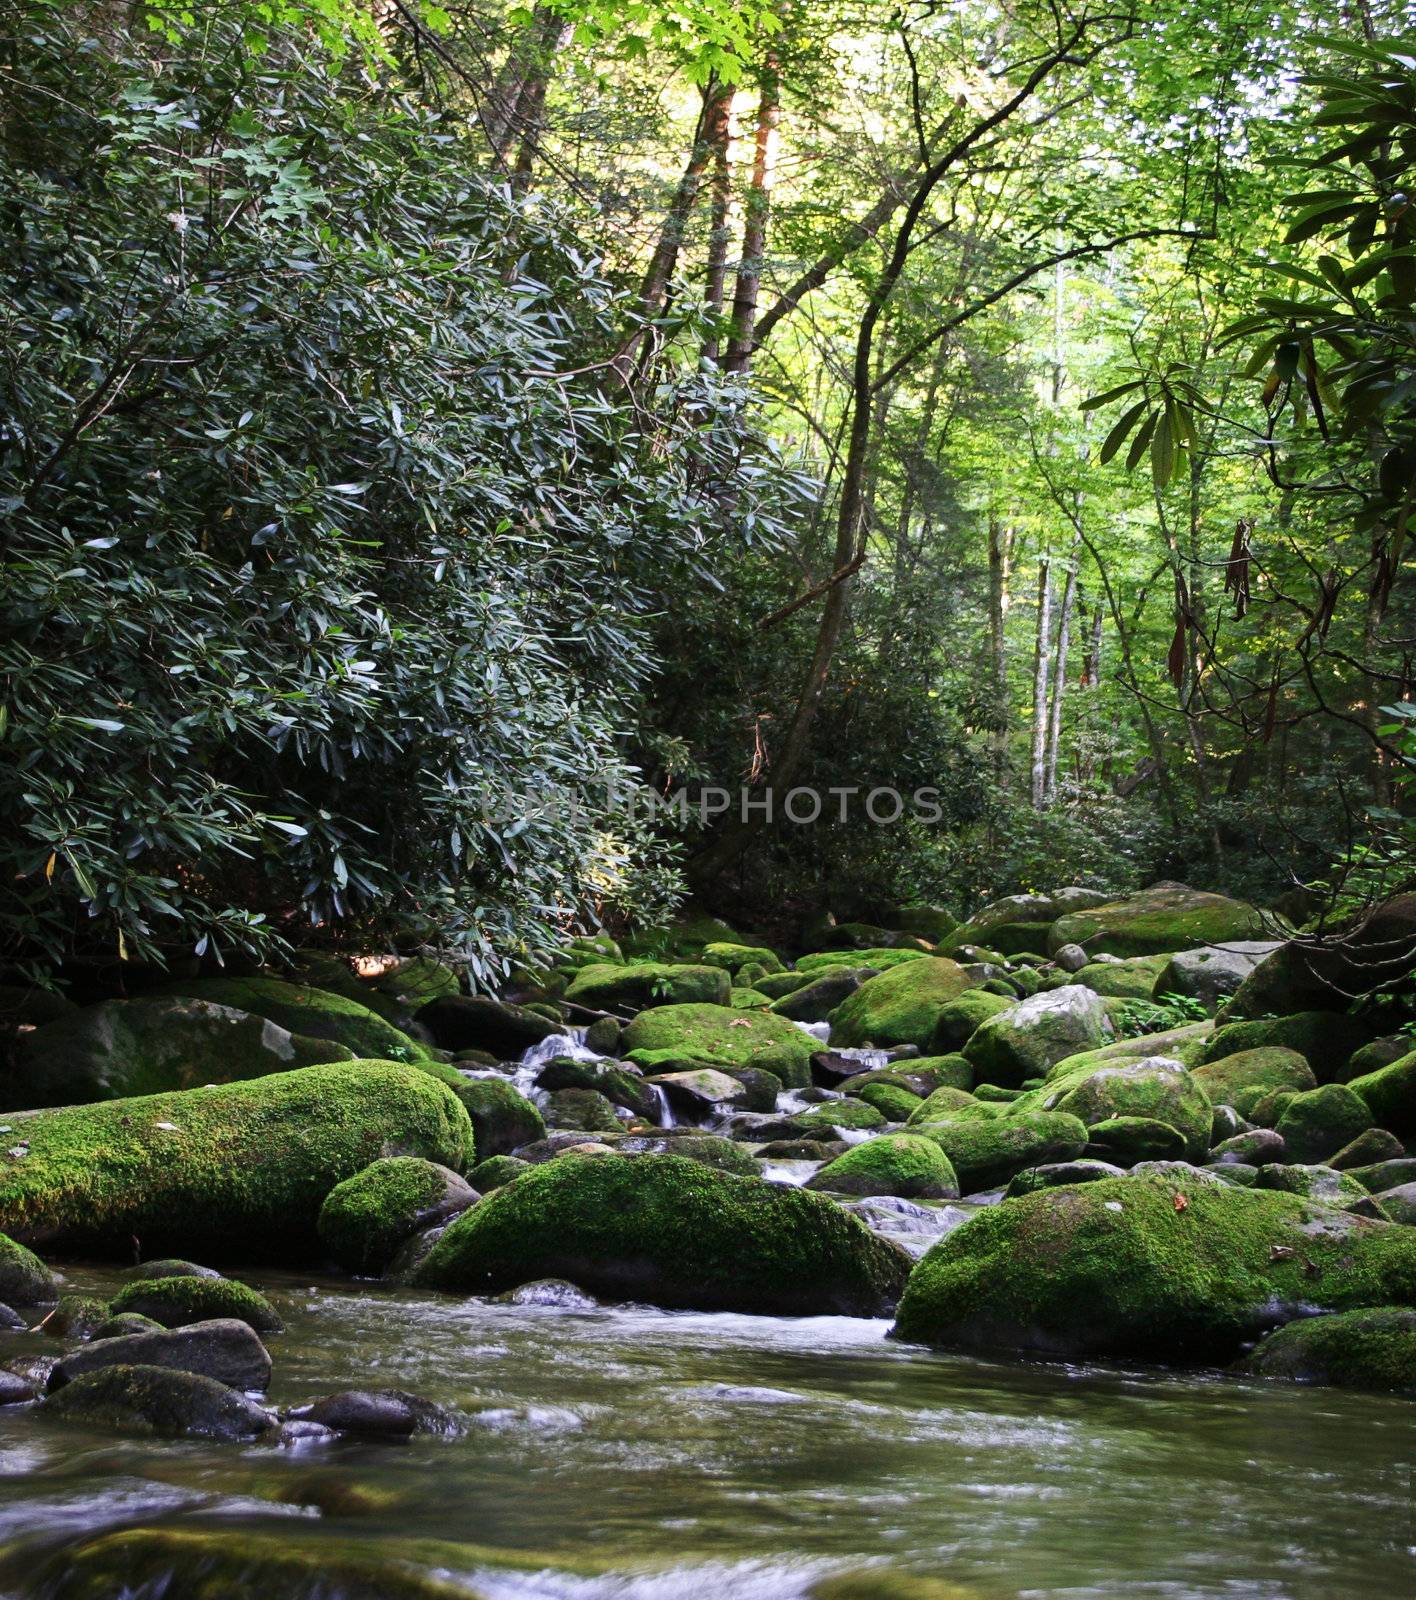 Gentle Rural river in Smoky Mountains over green mossy rocks